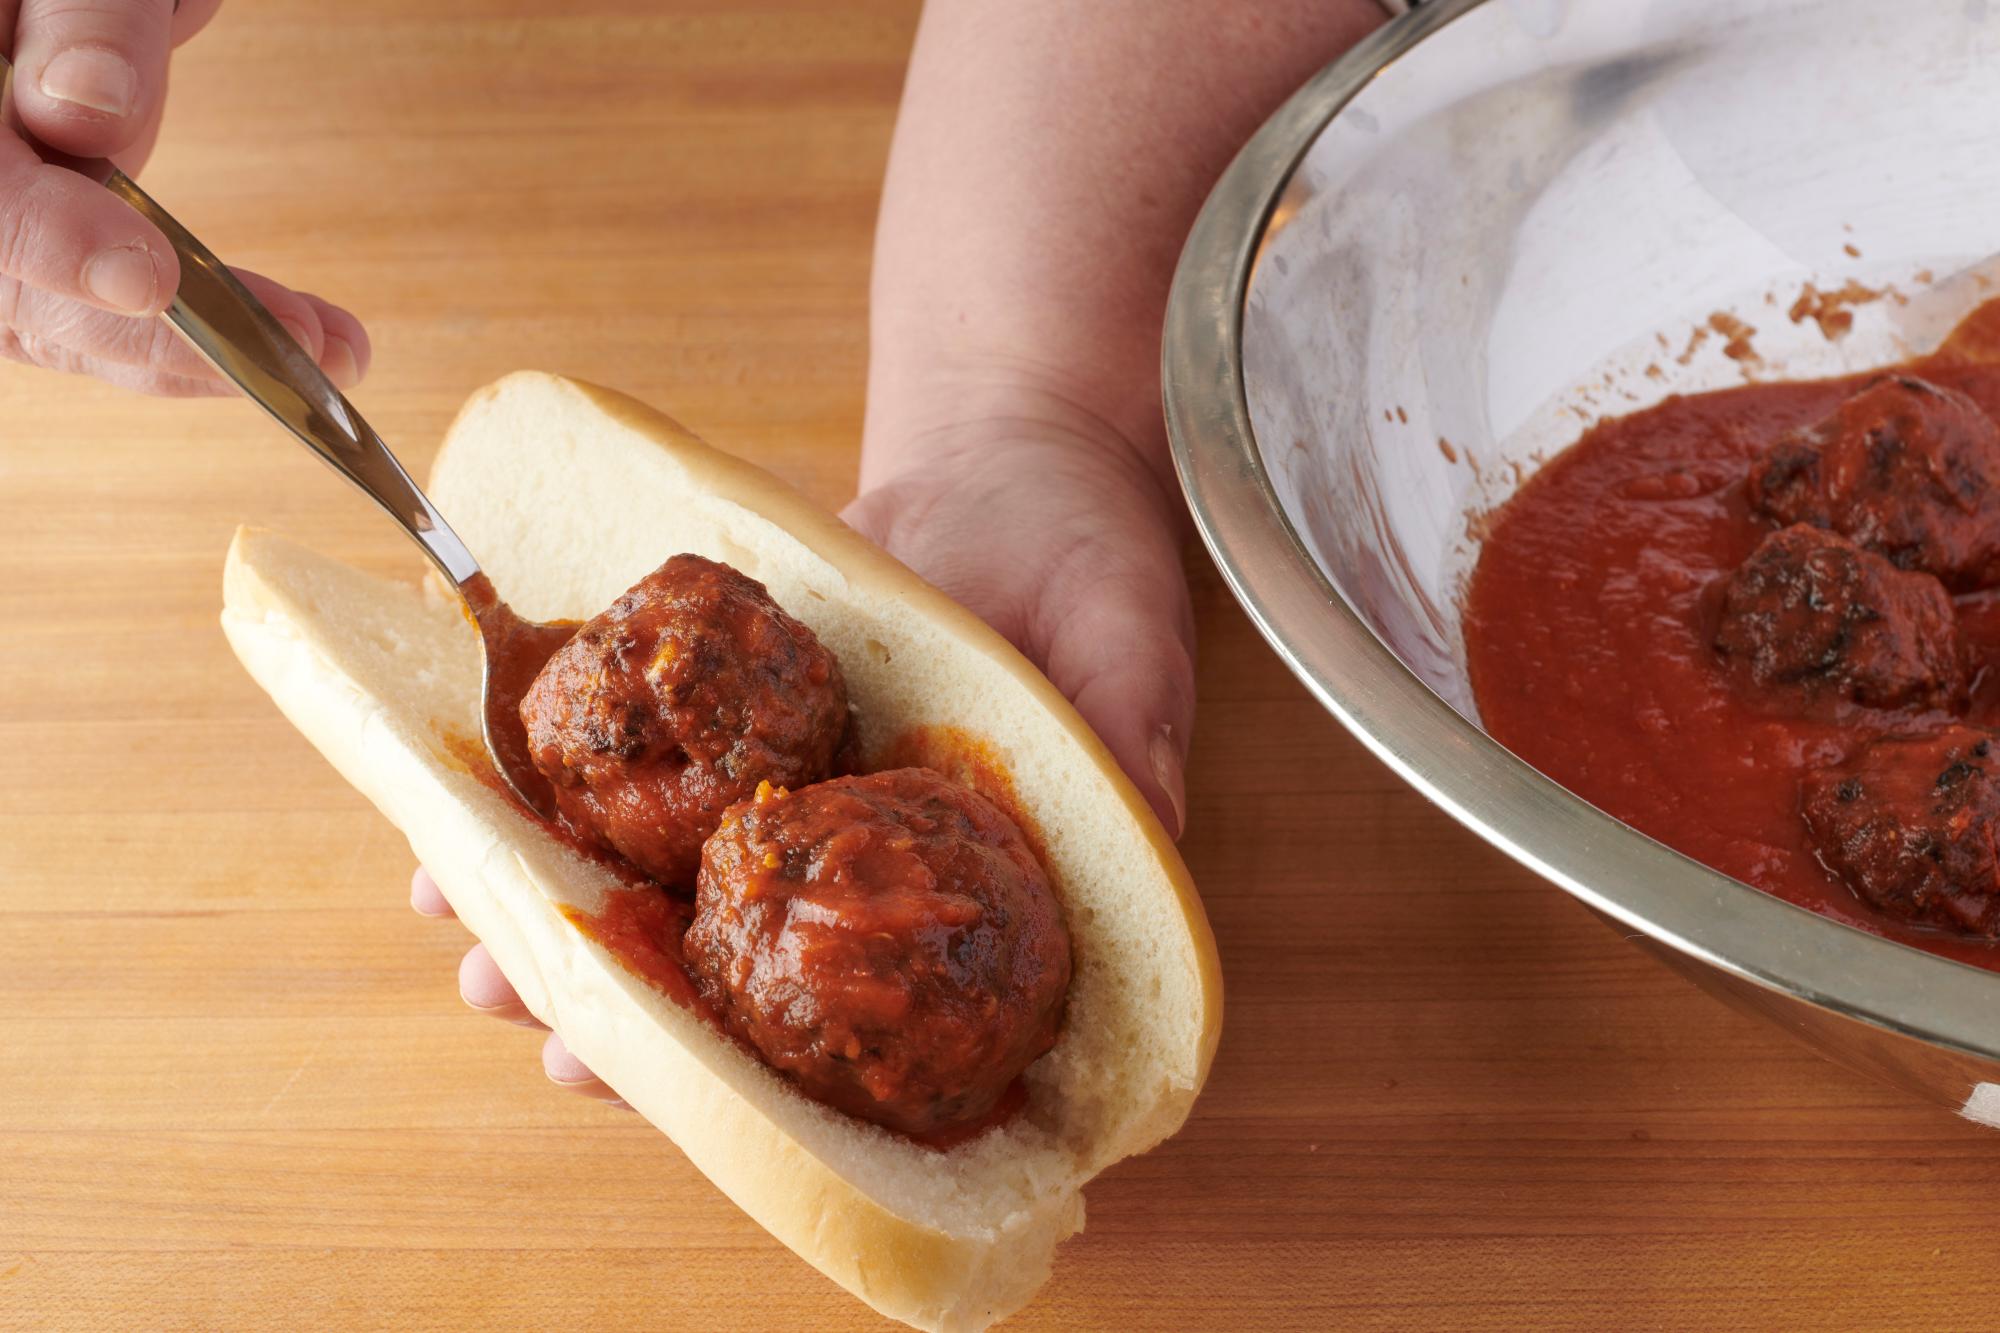 Placing meatballs on the rolls.